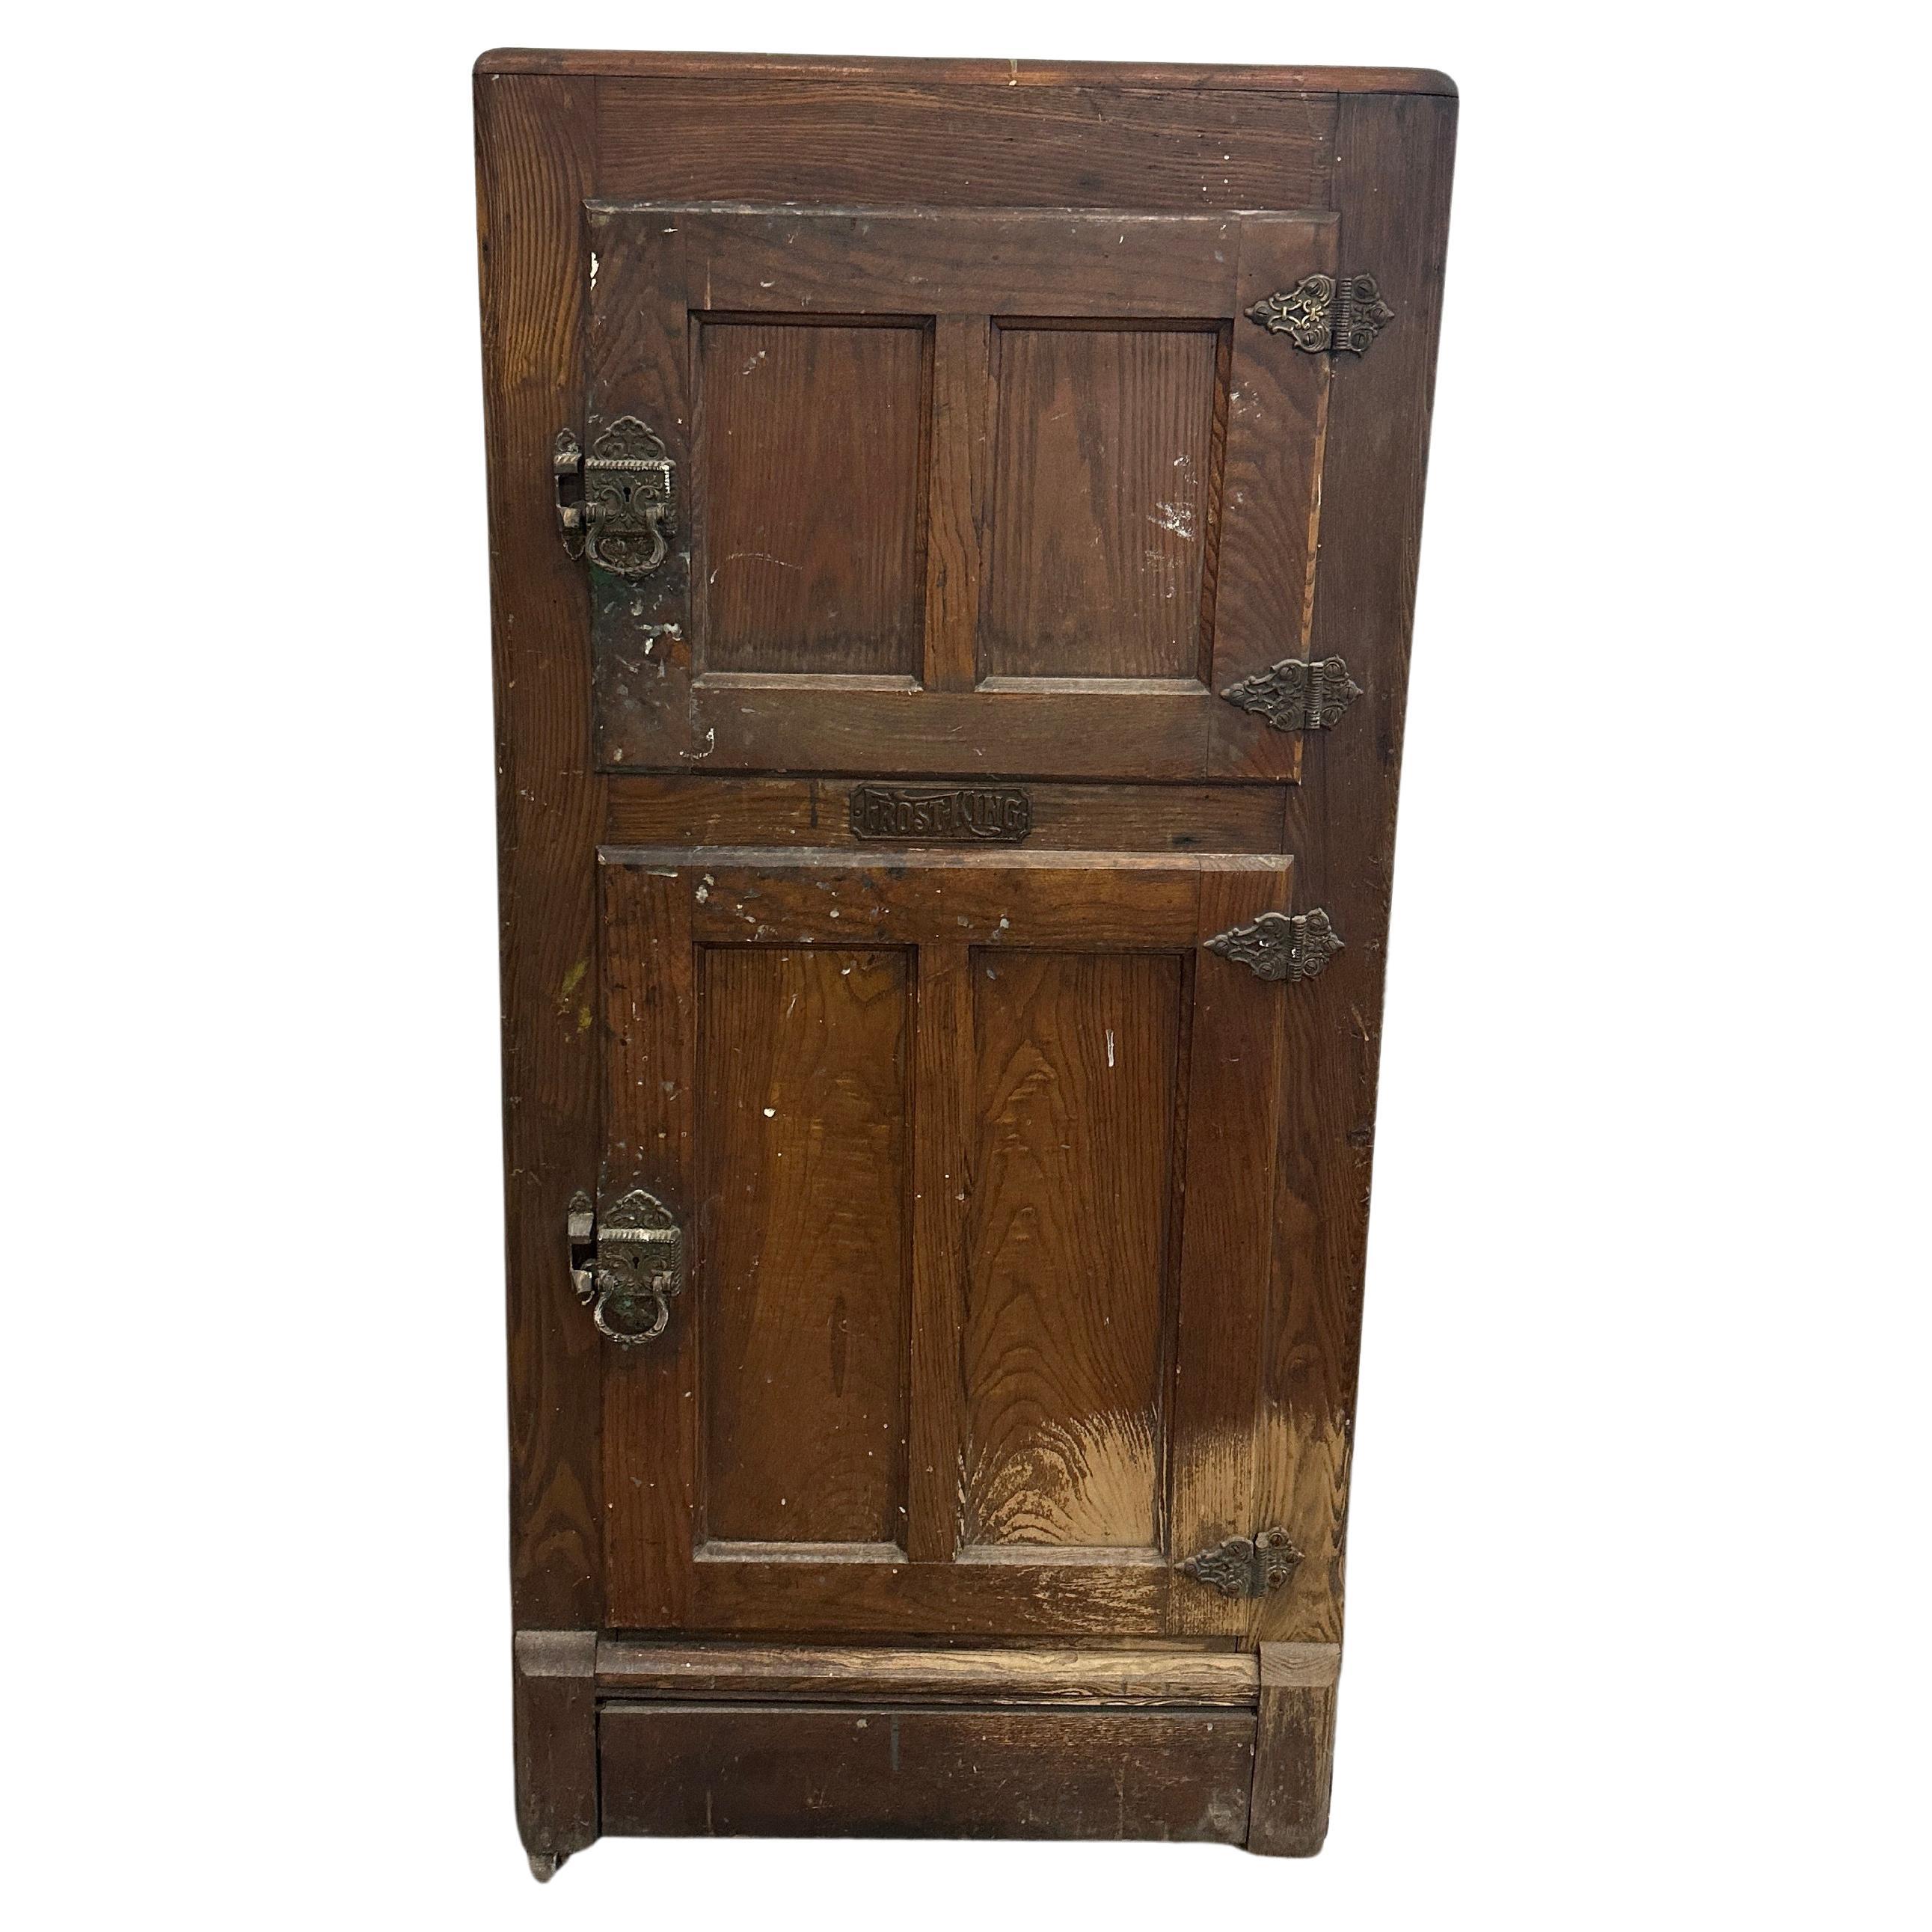 Frost King Early 20th Century Ice Box For Sale